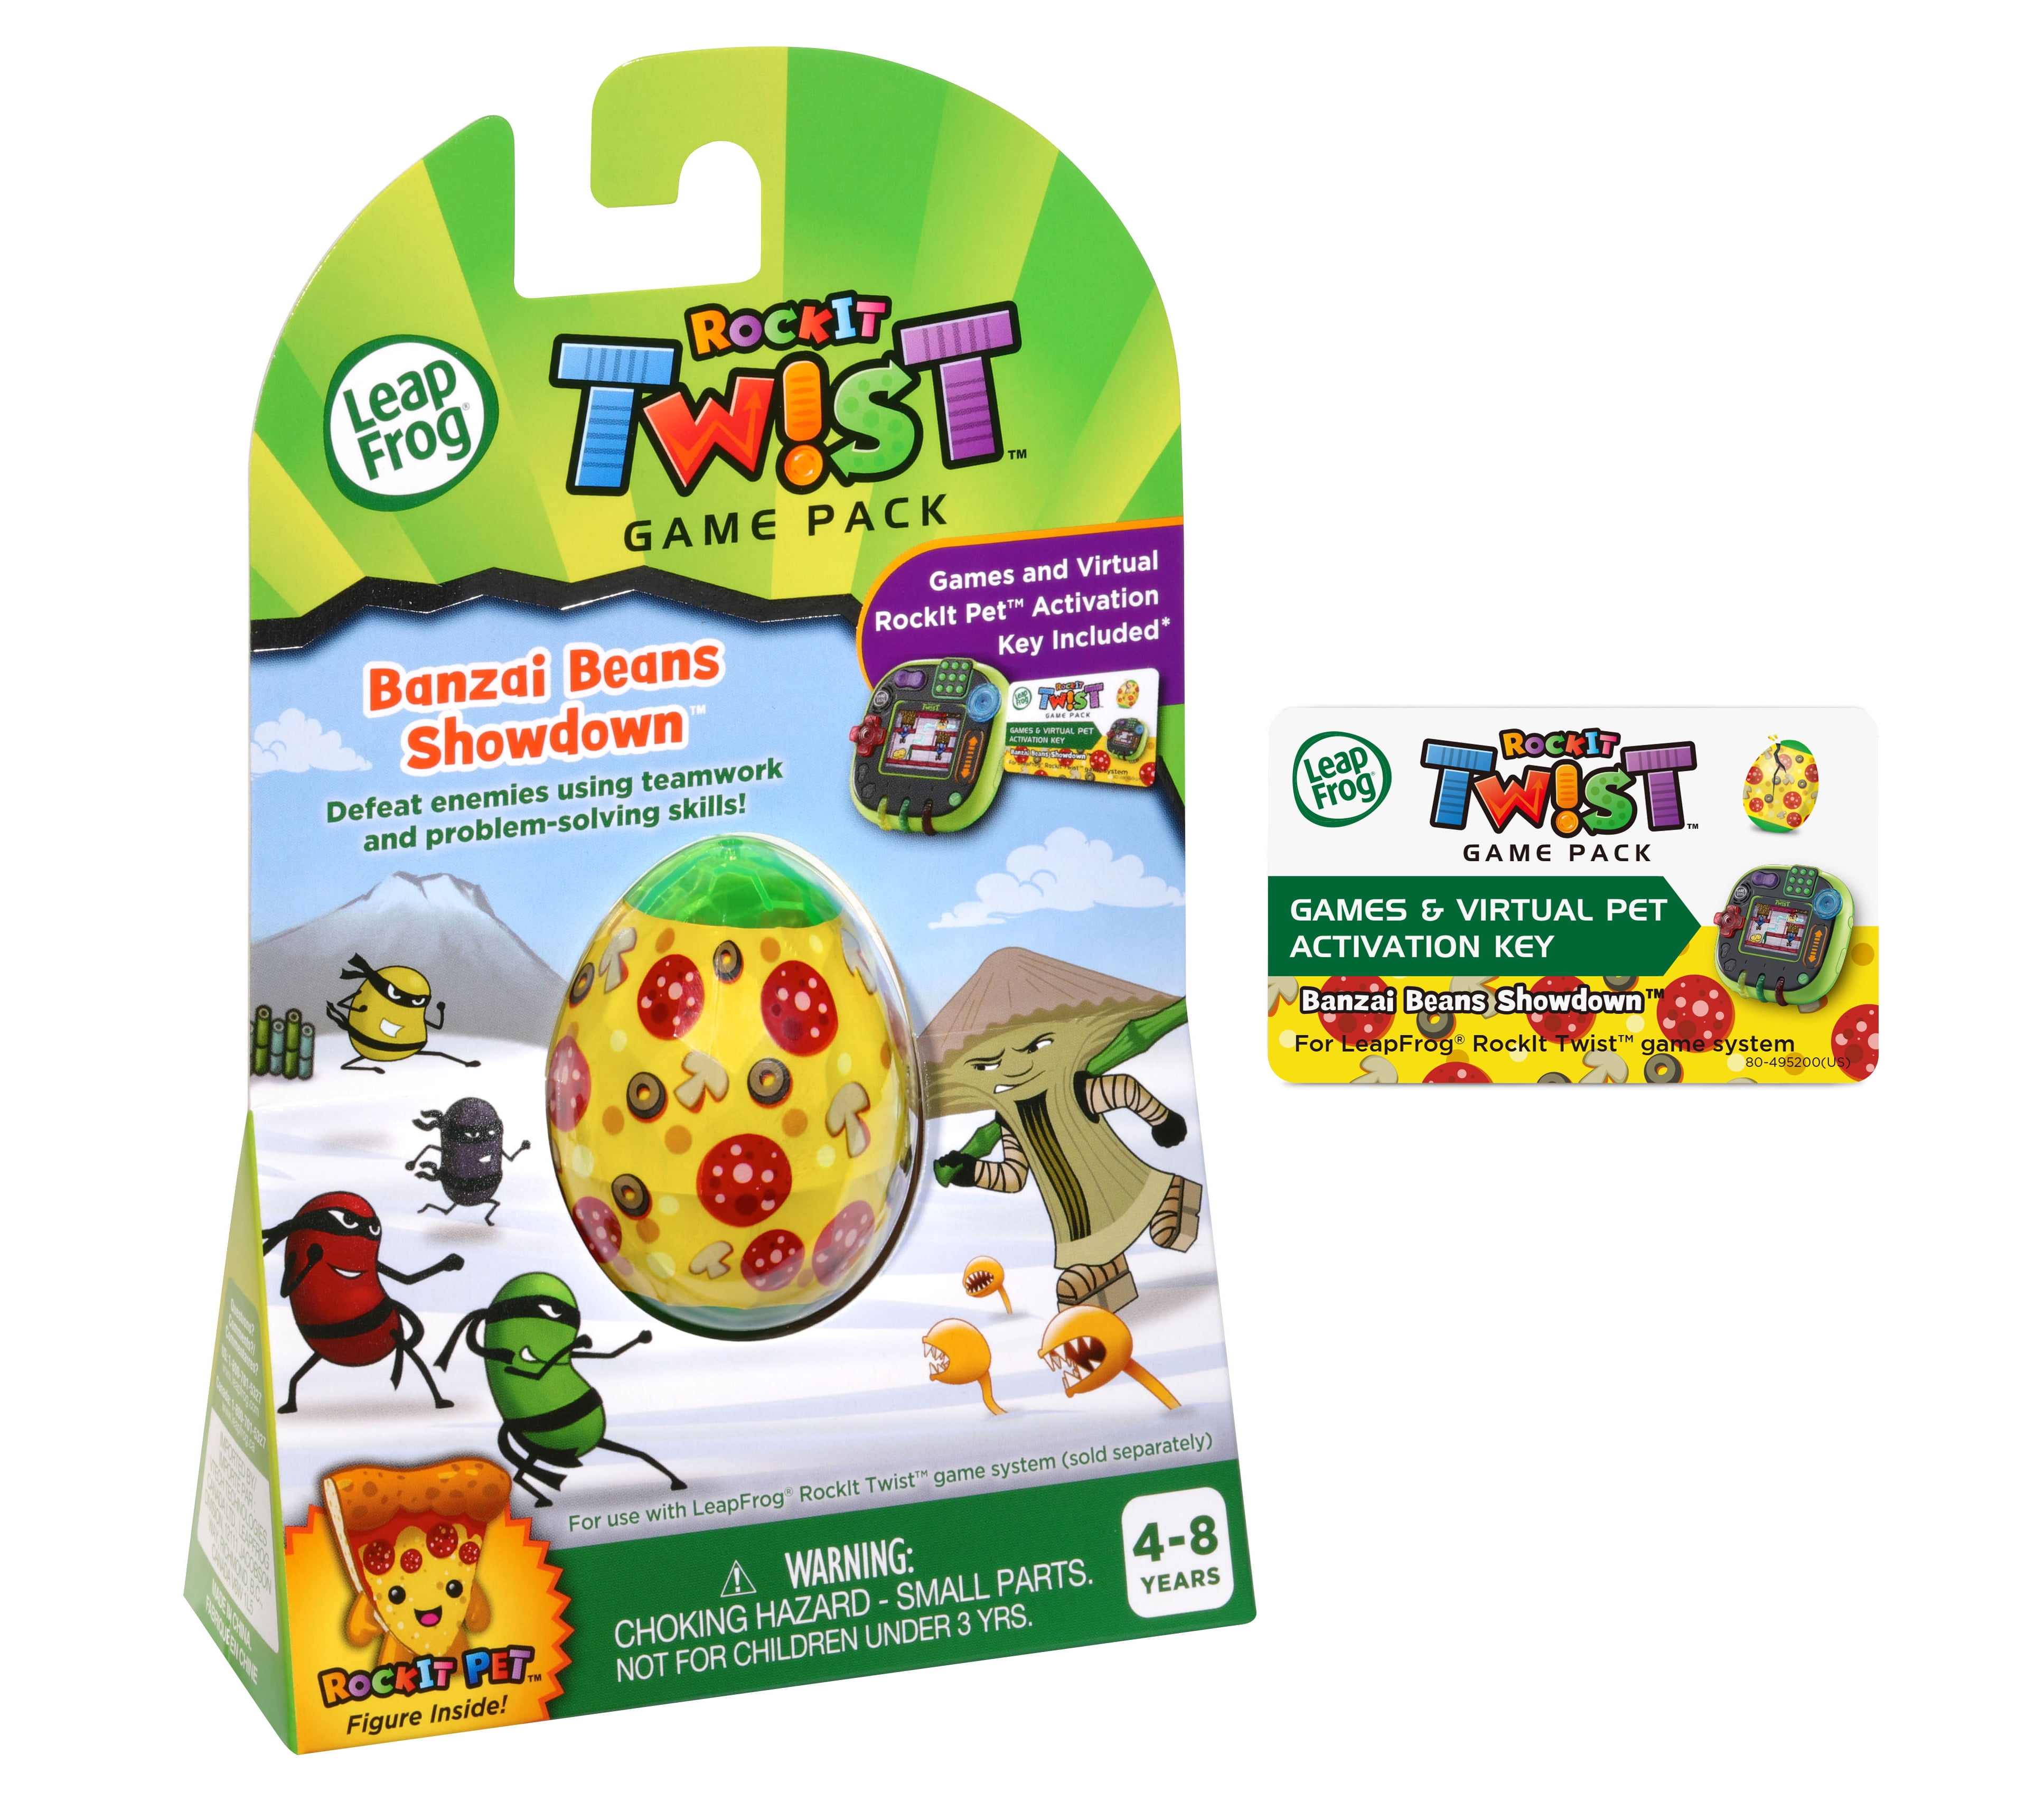 Details about   Lot Of 2 LeapFrog RockIt Twist Game Packs Dinosaur Discoveries & Trolls 